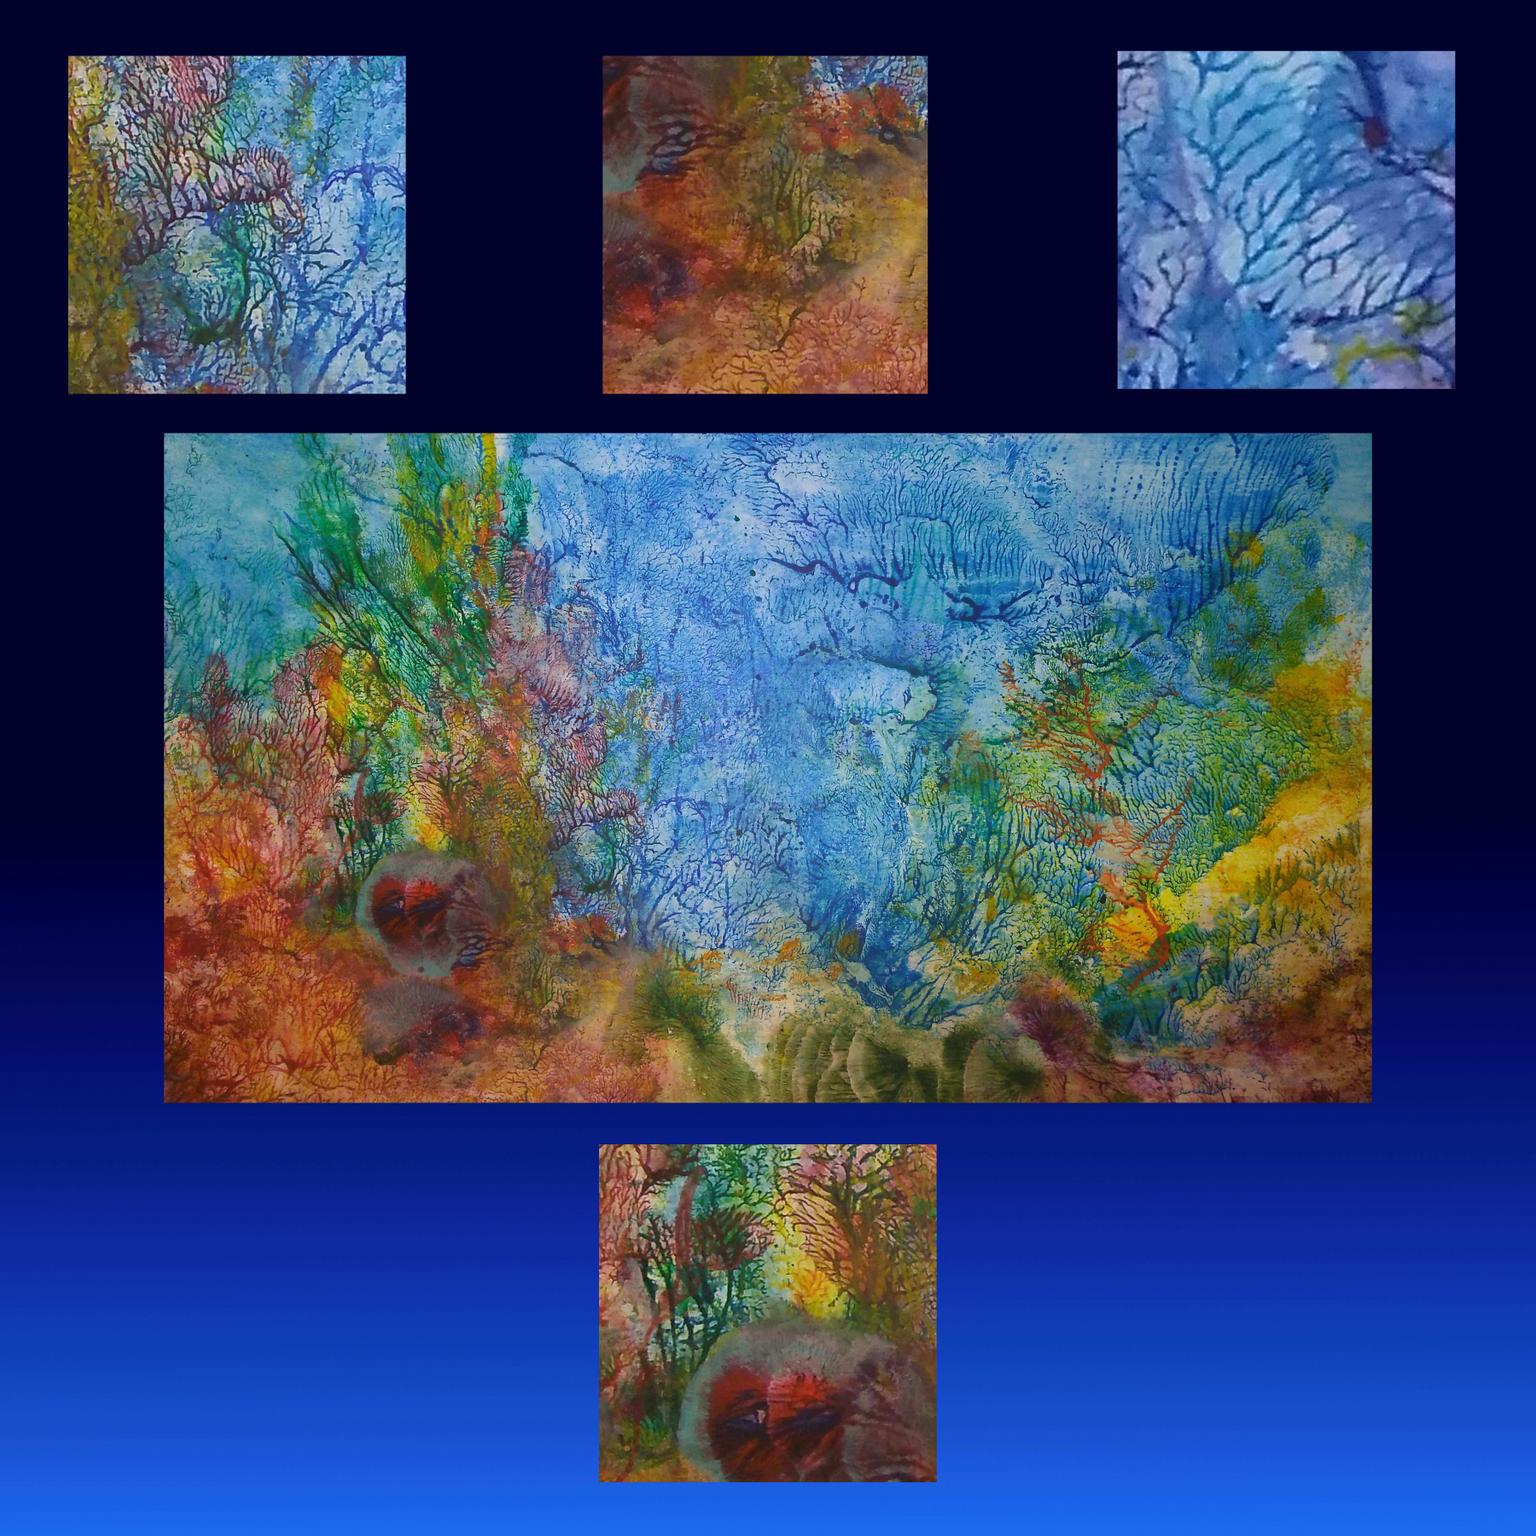 Image for entry 'Coral Reef at the center with four details'